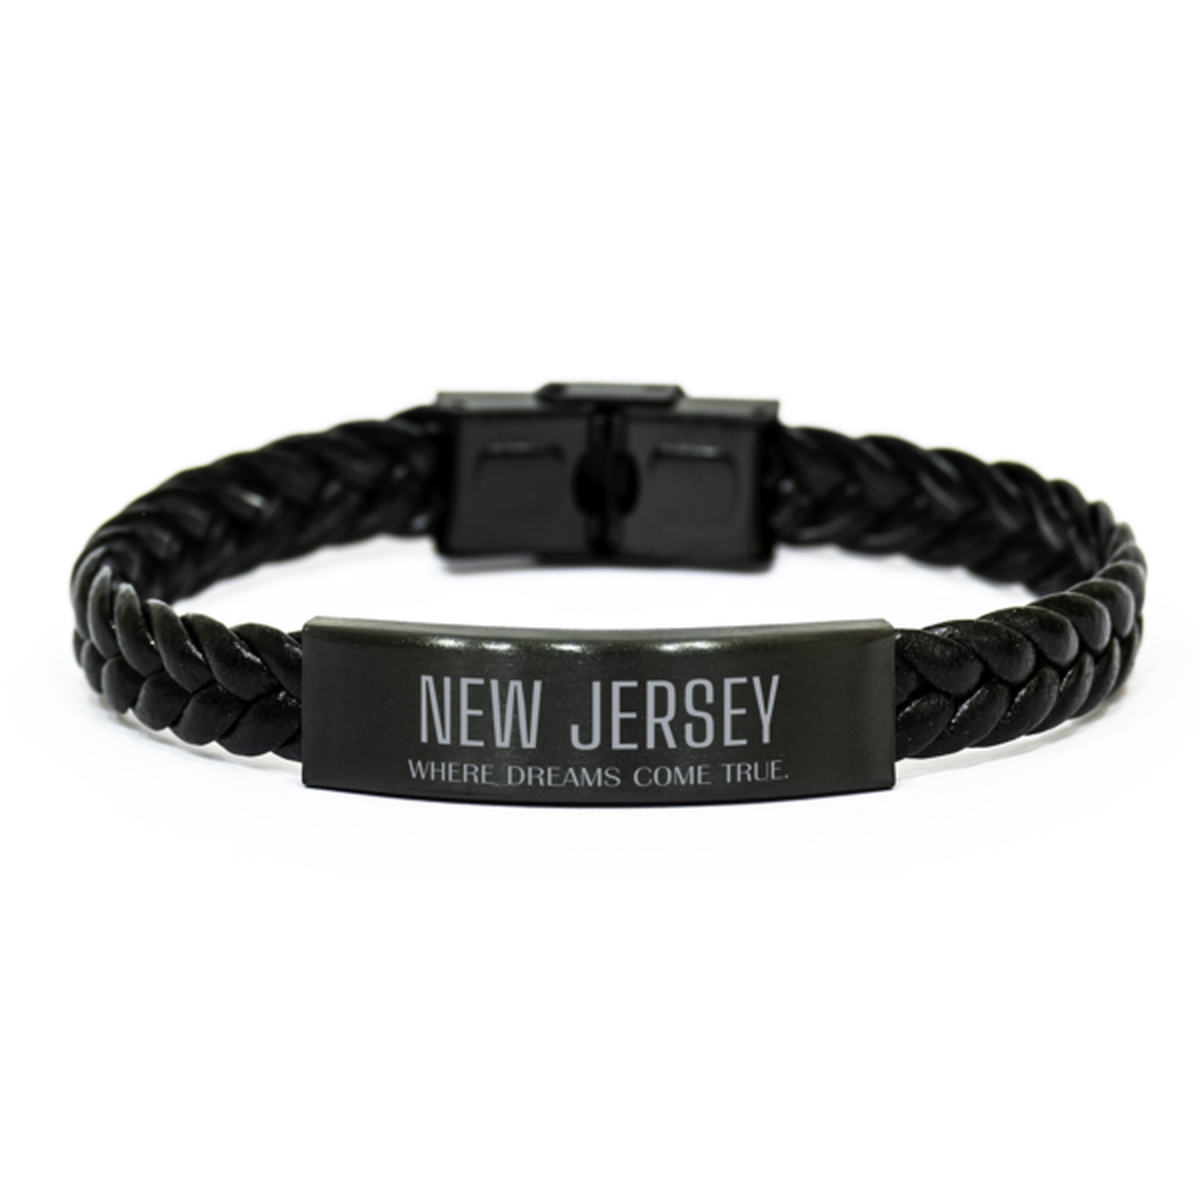 Love New Jersey State Braided Leather Bracelet, New Jersey Where dreams come true, Birthday Inspirational Gifts For New Jersey Men, Women, Friends